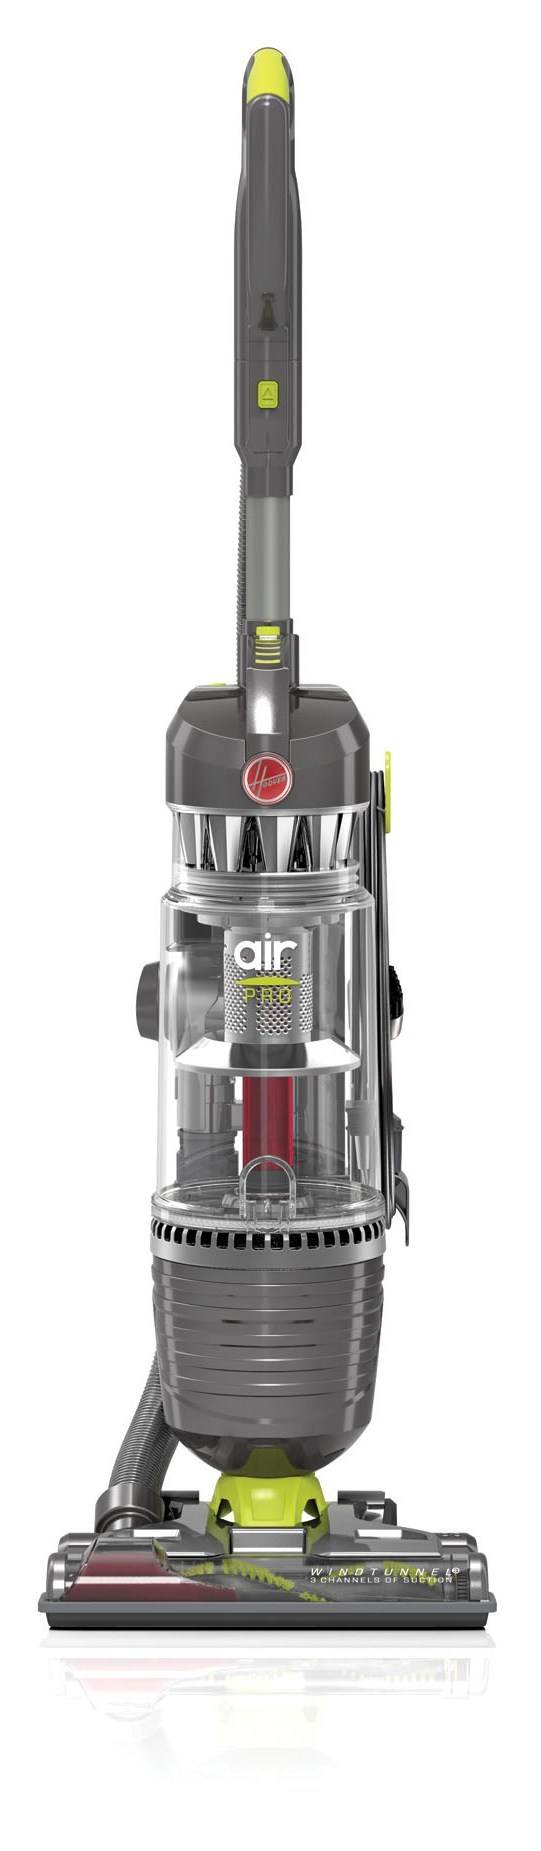 Hoover Air Pro Lightweight Bagless Upright Vacuum Carpet Cleaner, UH72450 - image 1 of 12